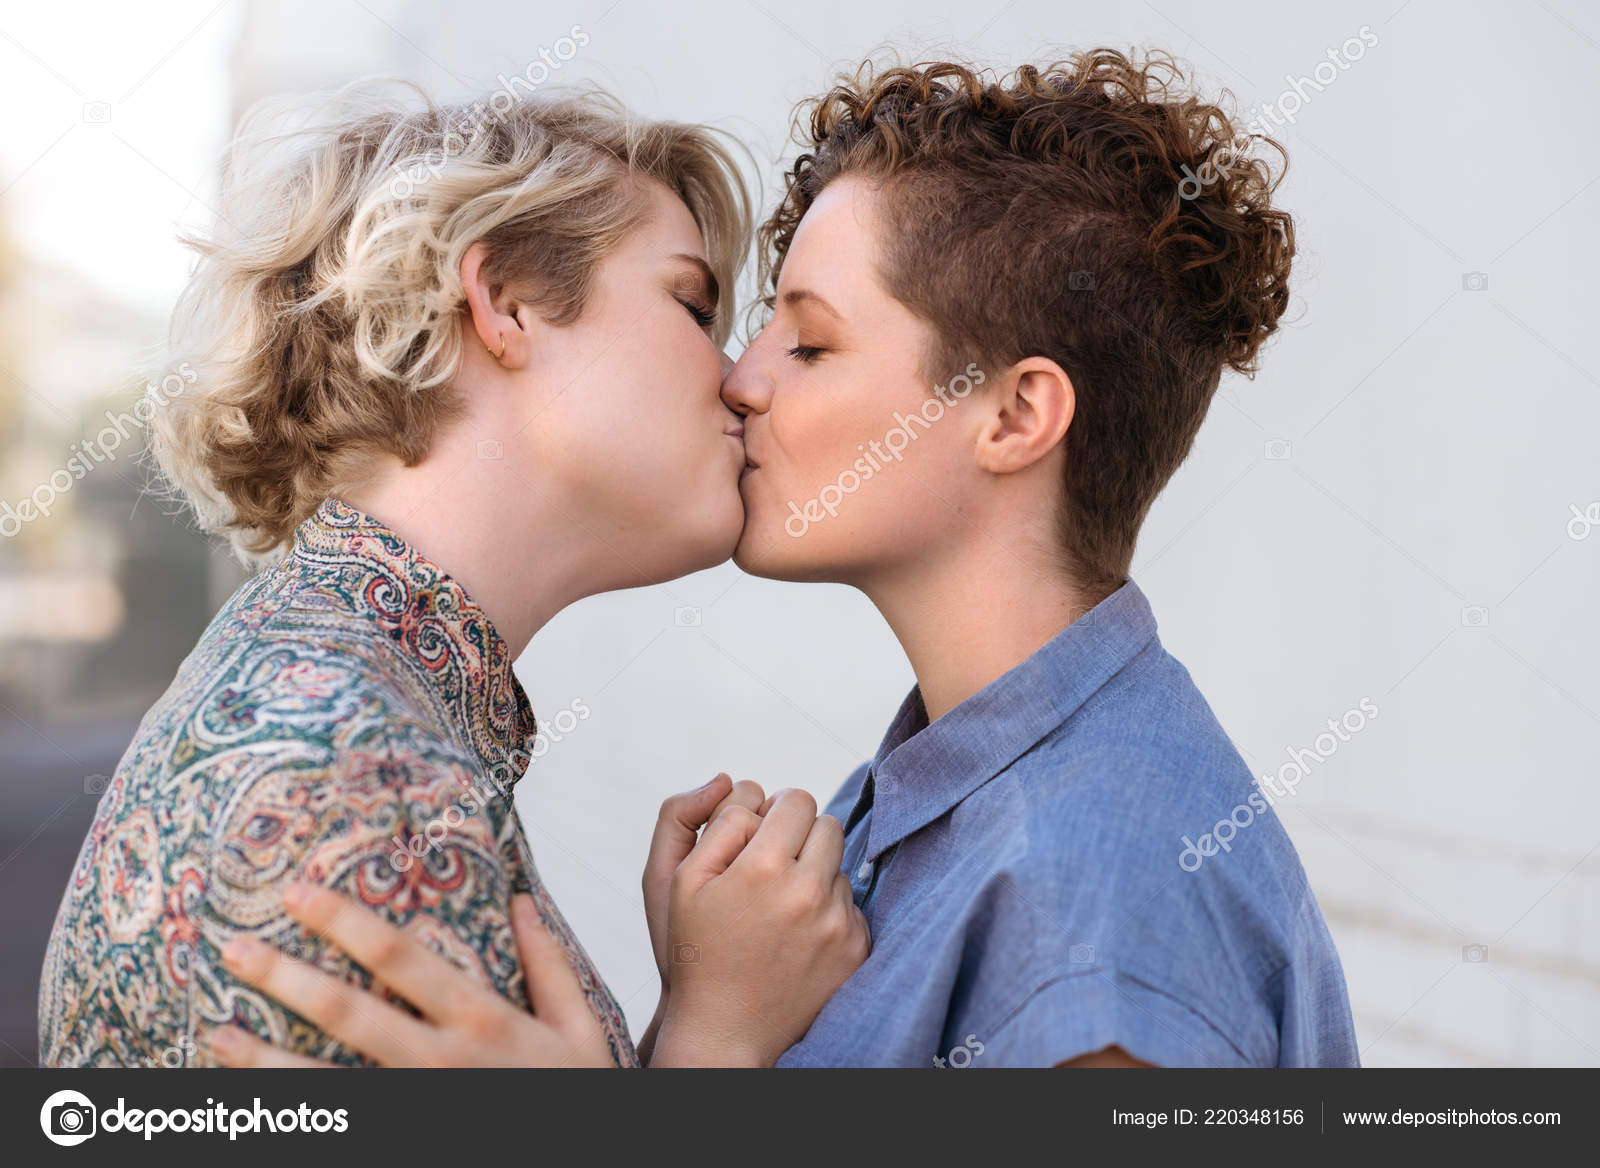 Lesbians making out and touching each other